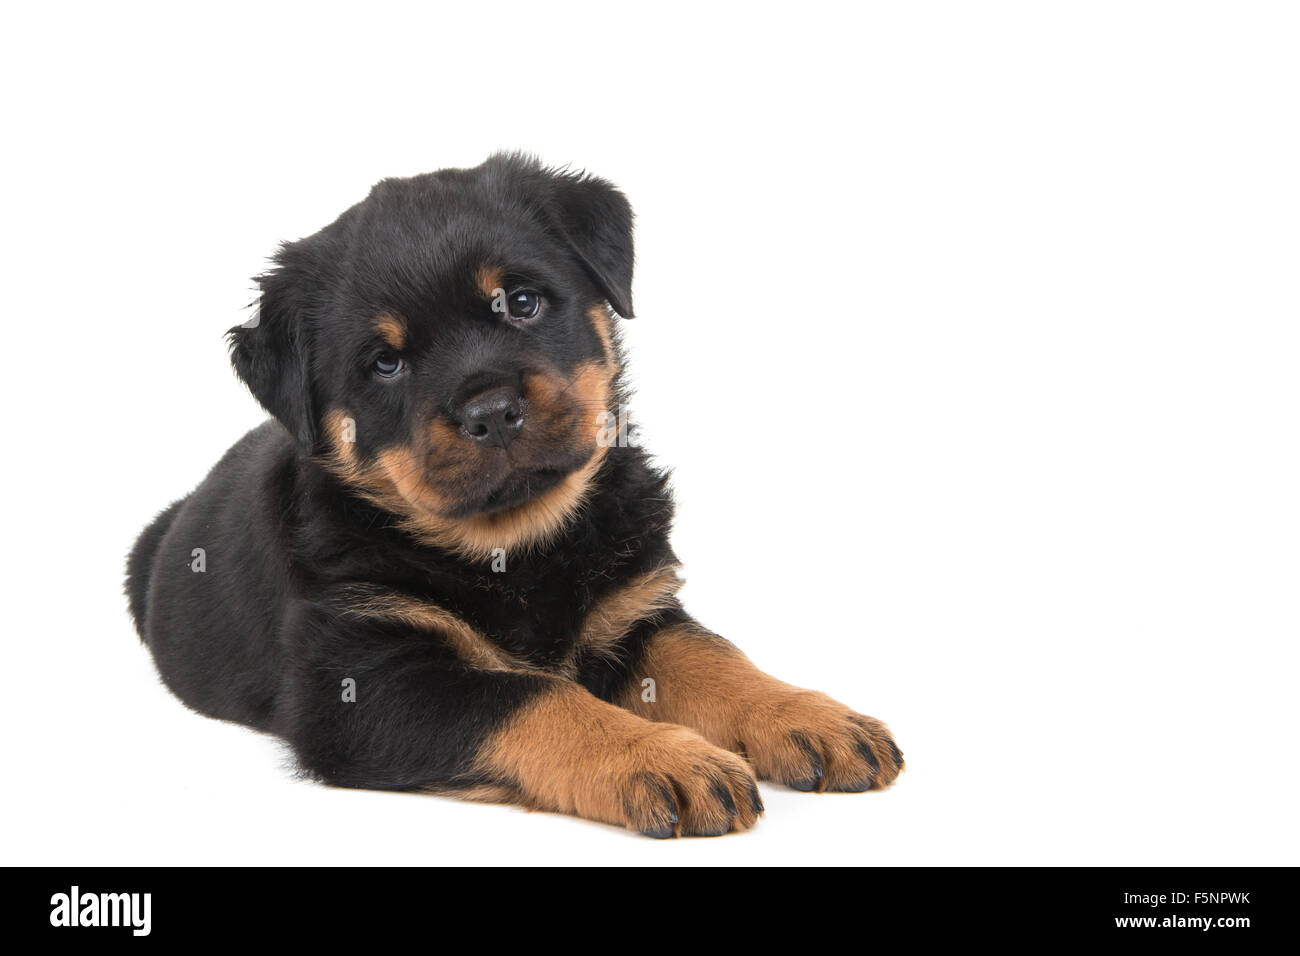 Cute rottweiler puppy lying down Stock Photo